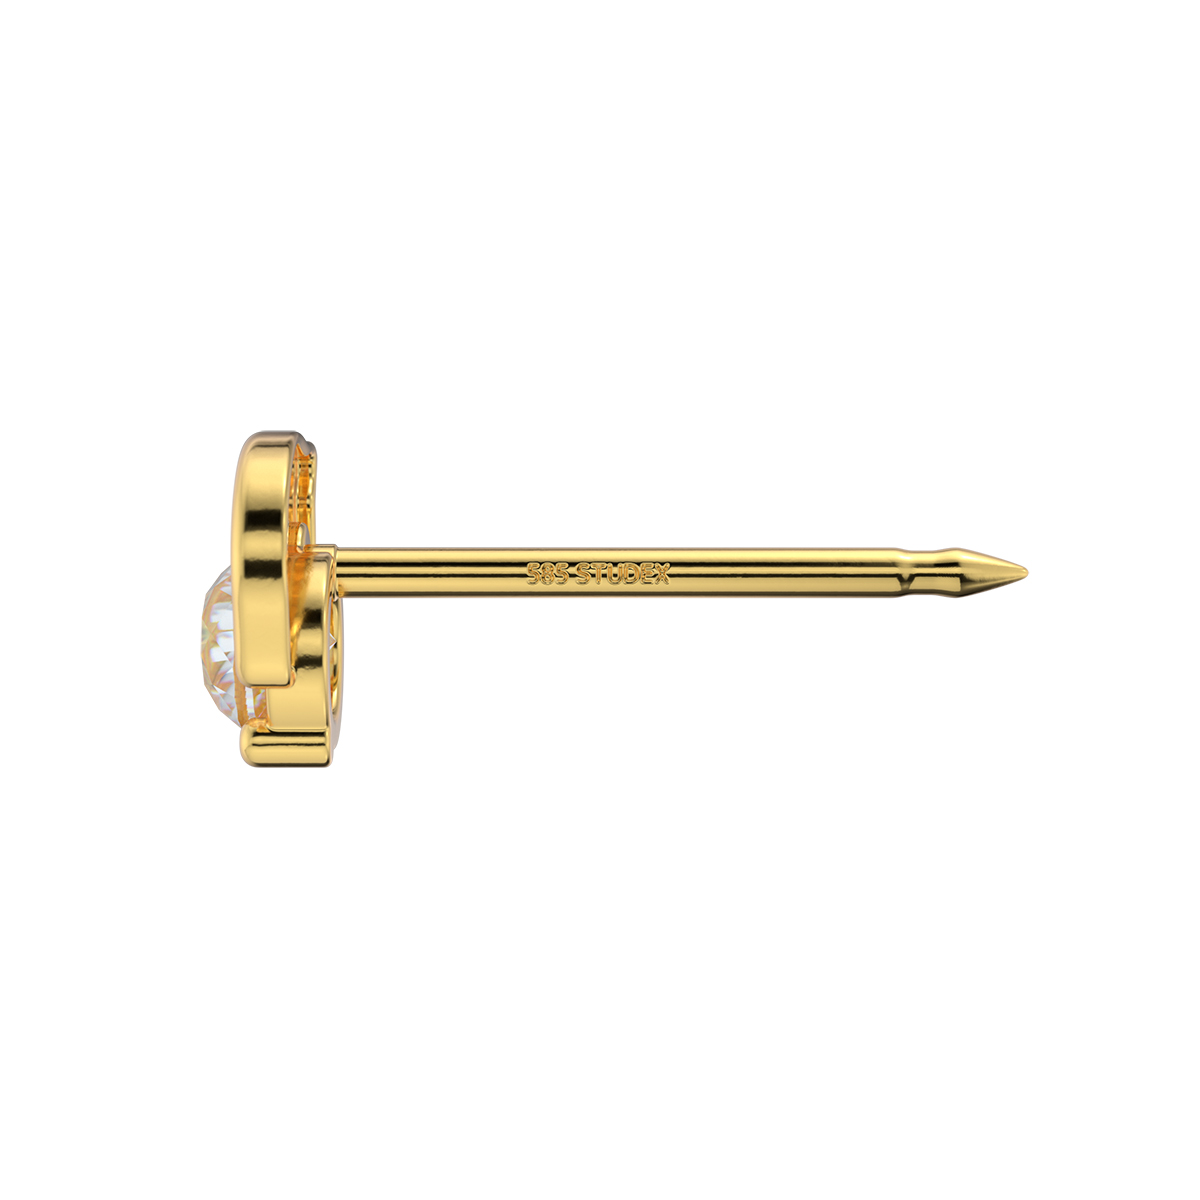 System 75 ear studs, 14 ct yellow gold